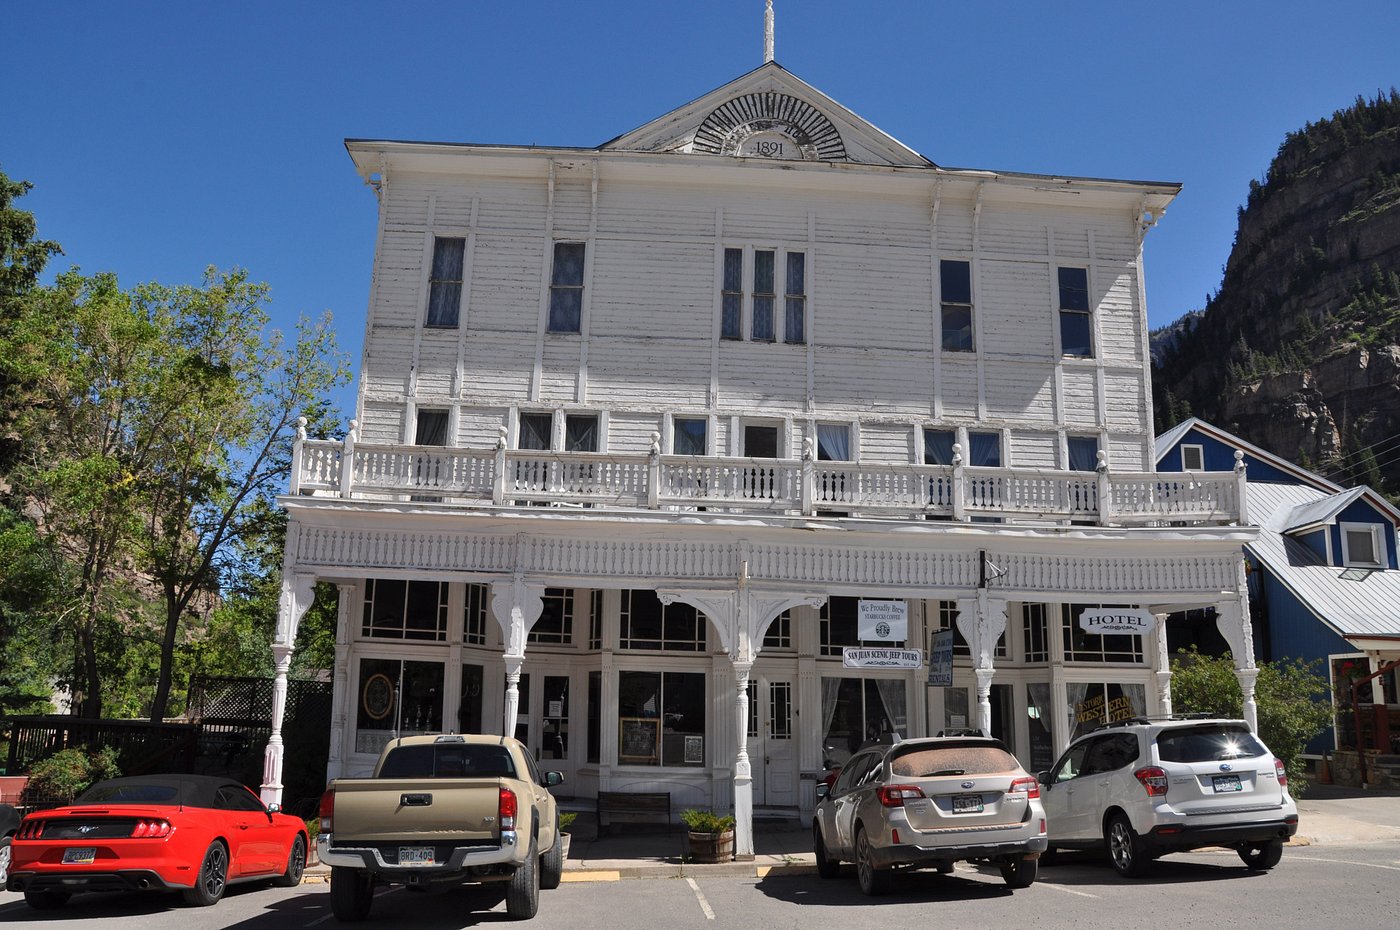 HISTORIC WESTERN HOTEL Prices & Motel Reviews (Ouray, CO)